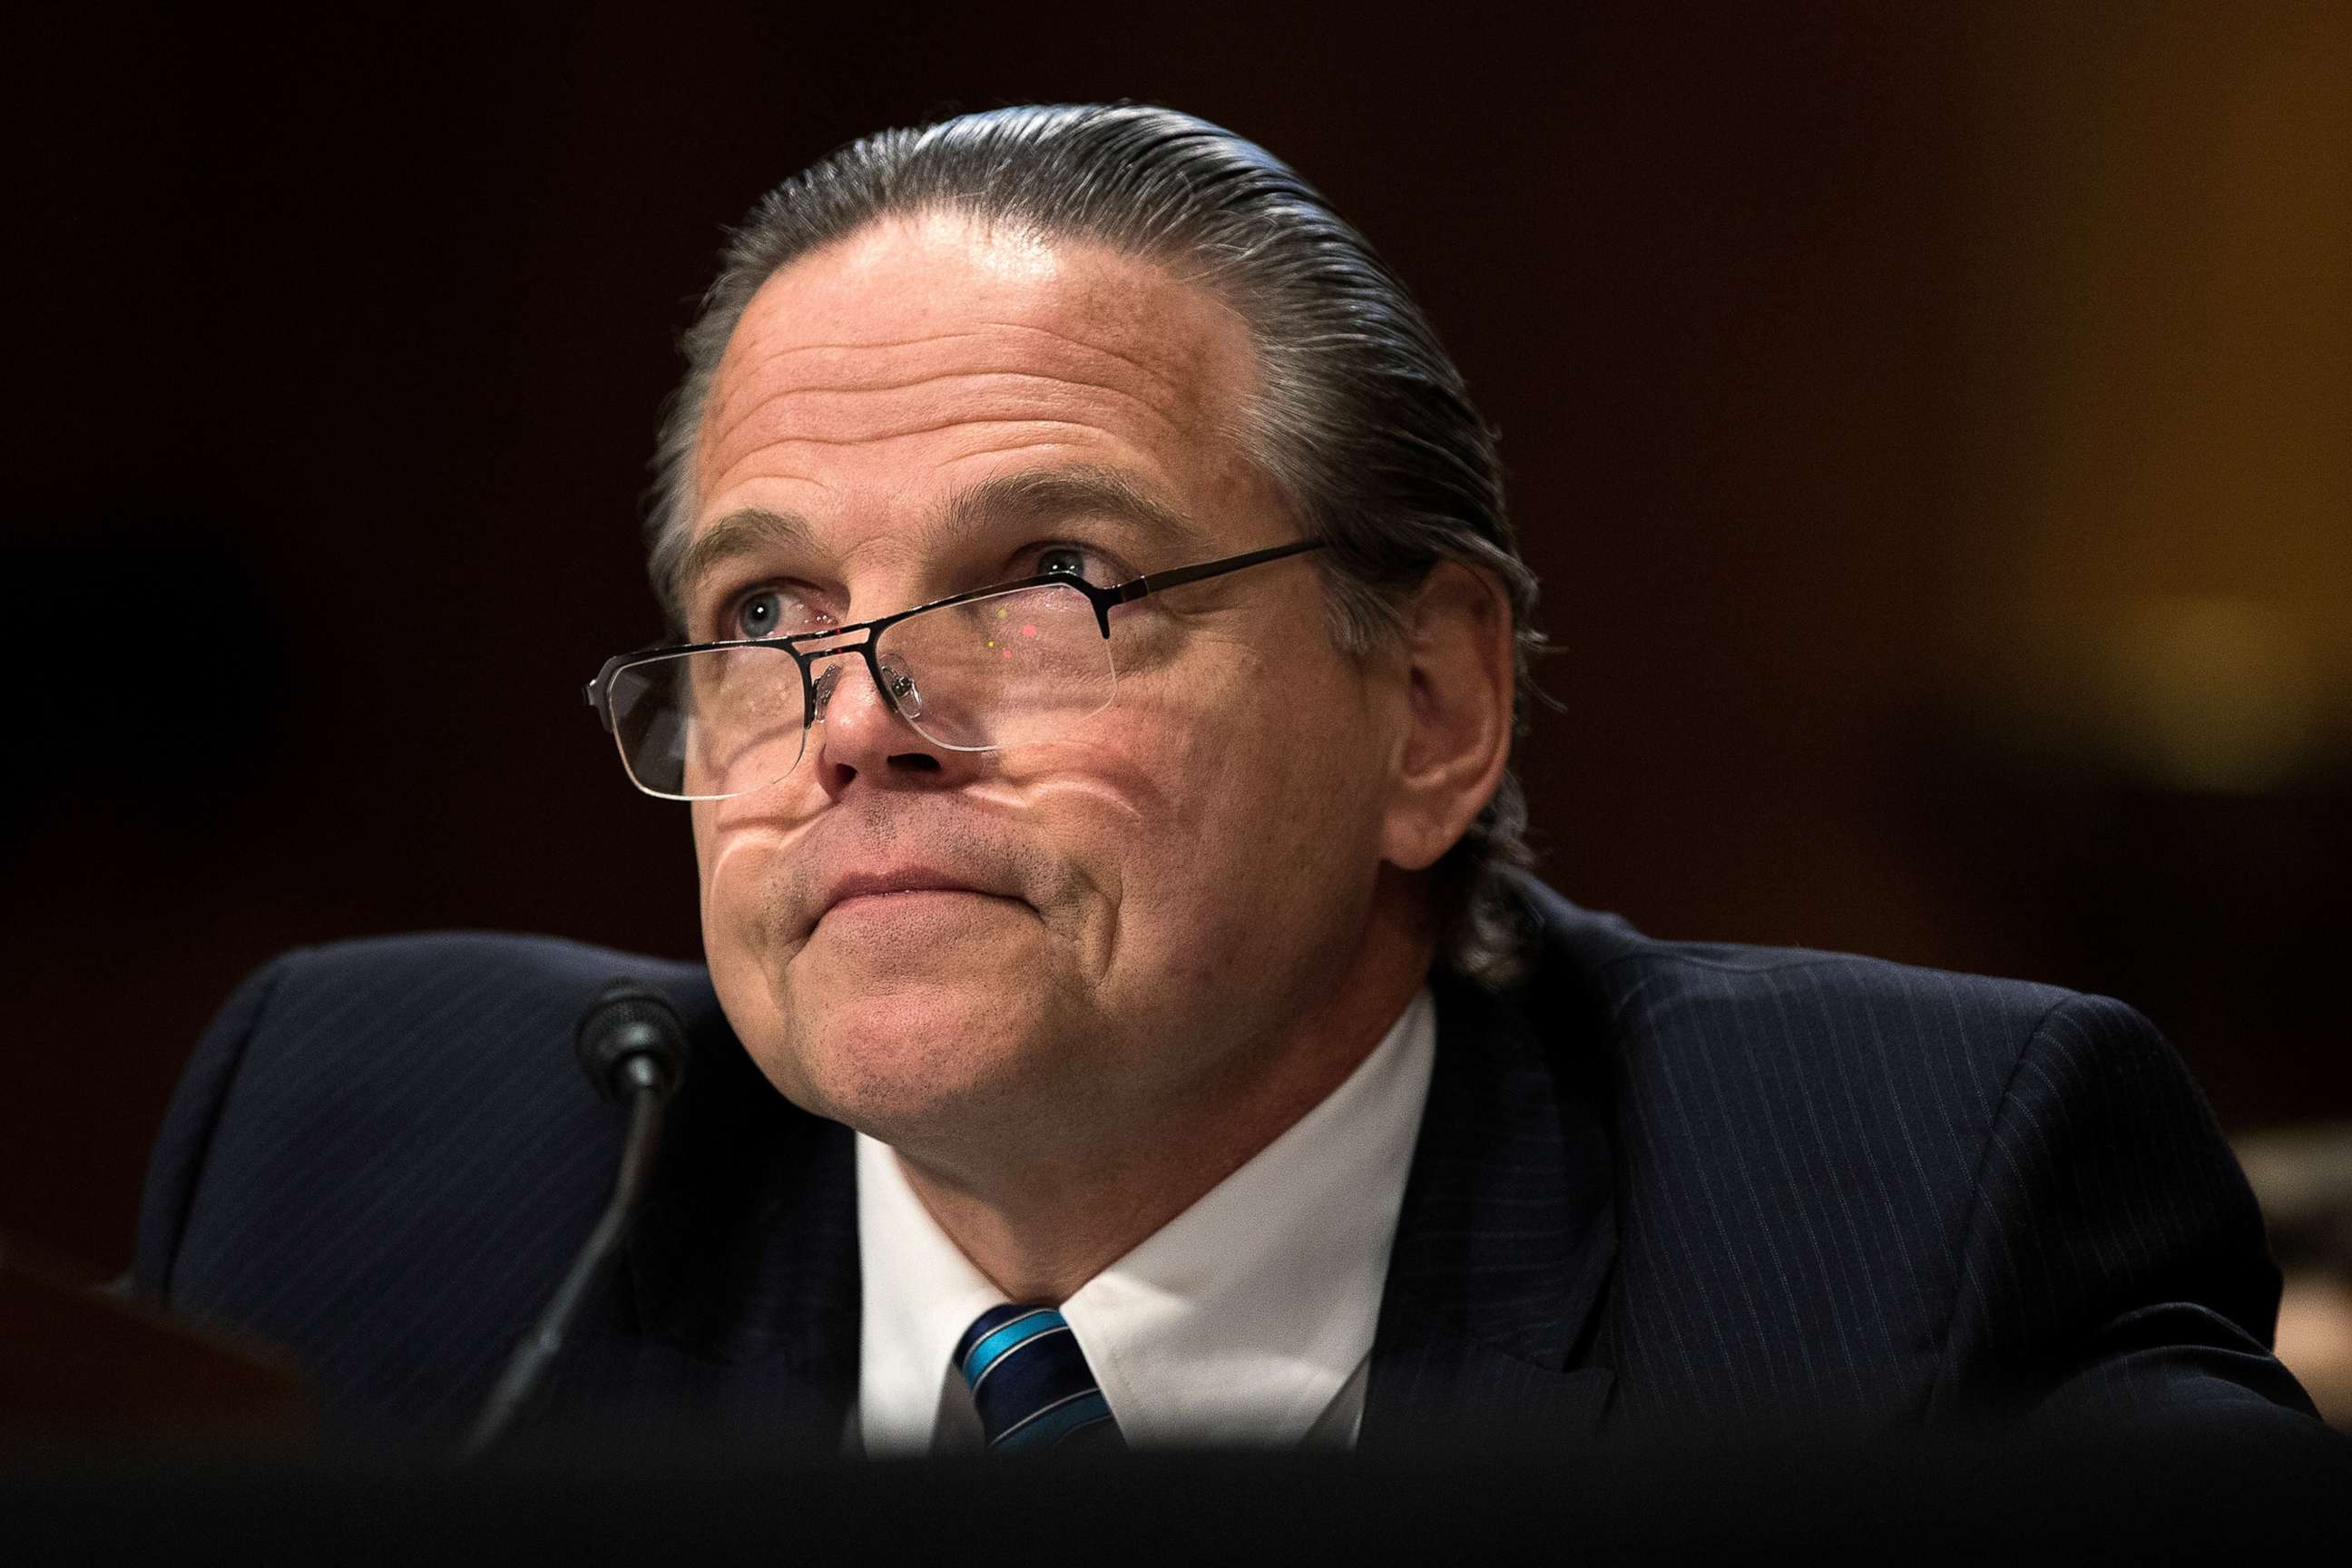 PHOTO: Daniel Foote, Deputy Assistant Secretary of State for the Bureau of International Narcotics and Law Enforcement at the U.S. Department of State, testifies during a Senate Foreign Relations Committee hearing on May 26, 2016, in Washington, D.C.